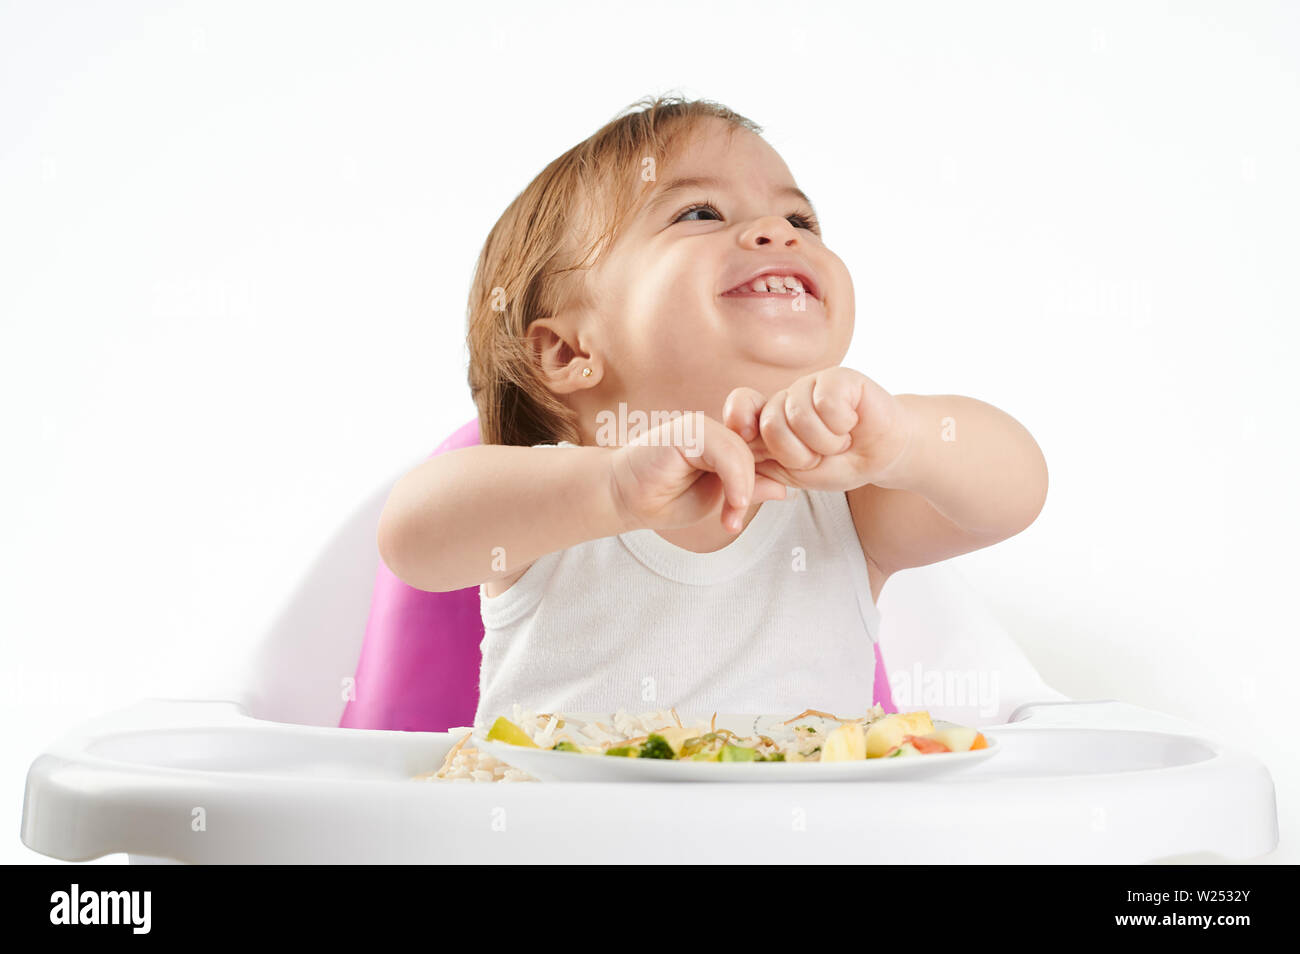 Portrait of baby playing with food isolated on white background Stock Photo